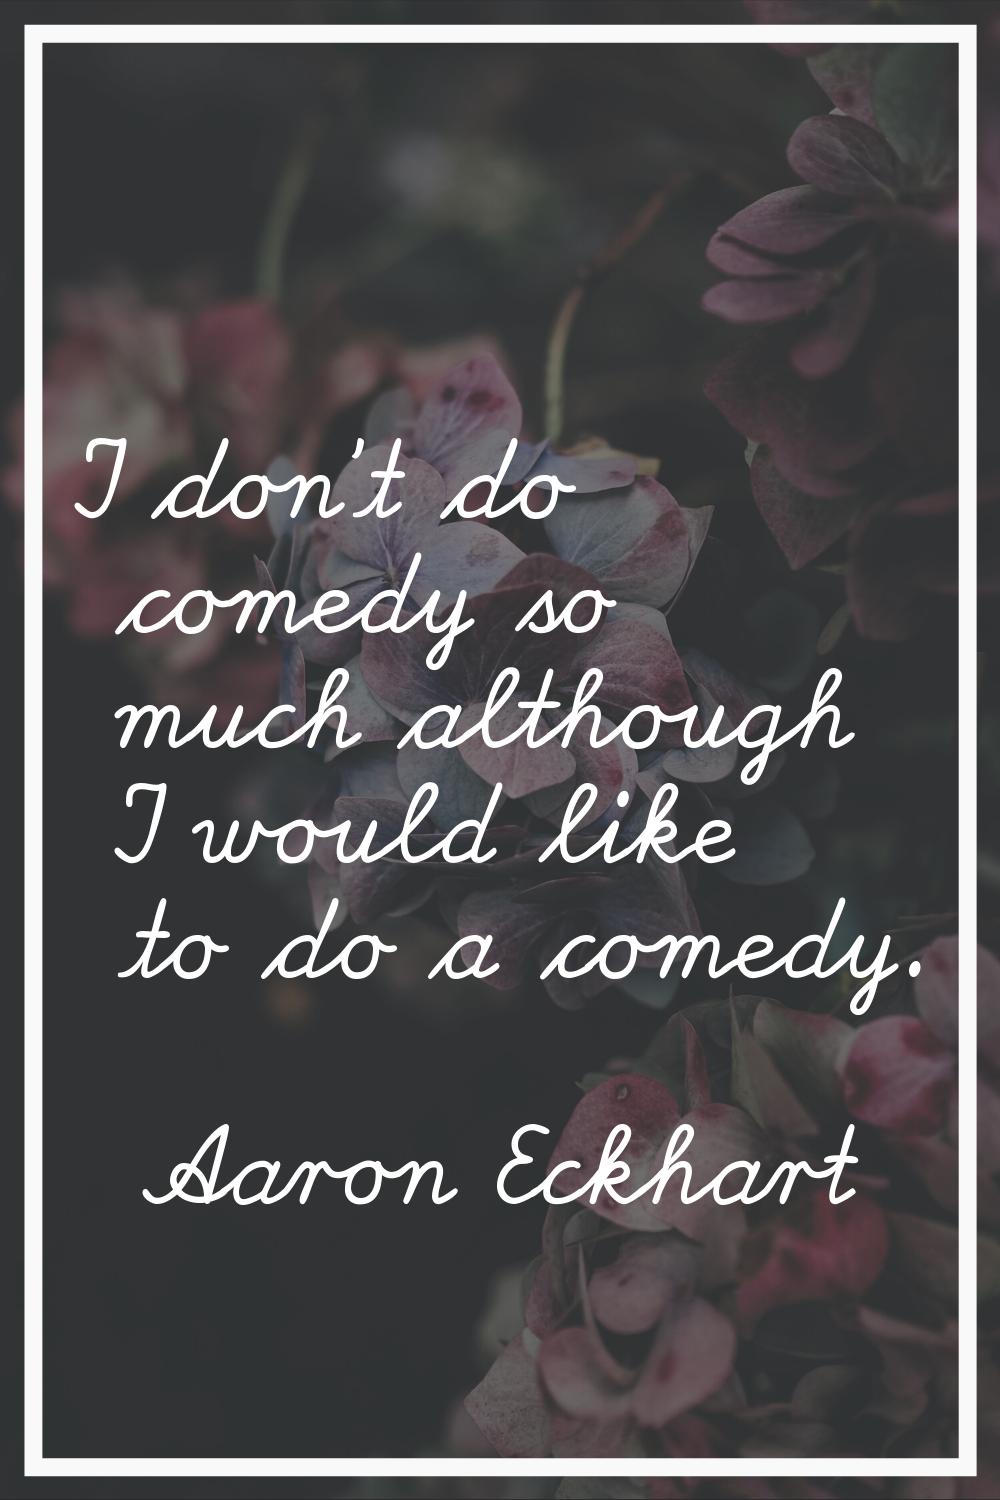 I don't do comedy so much although I would like to do a comedy.